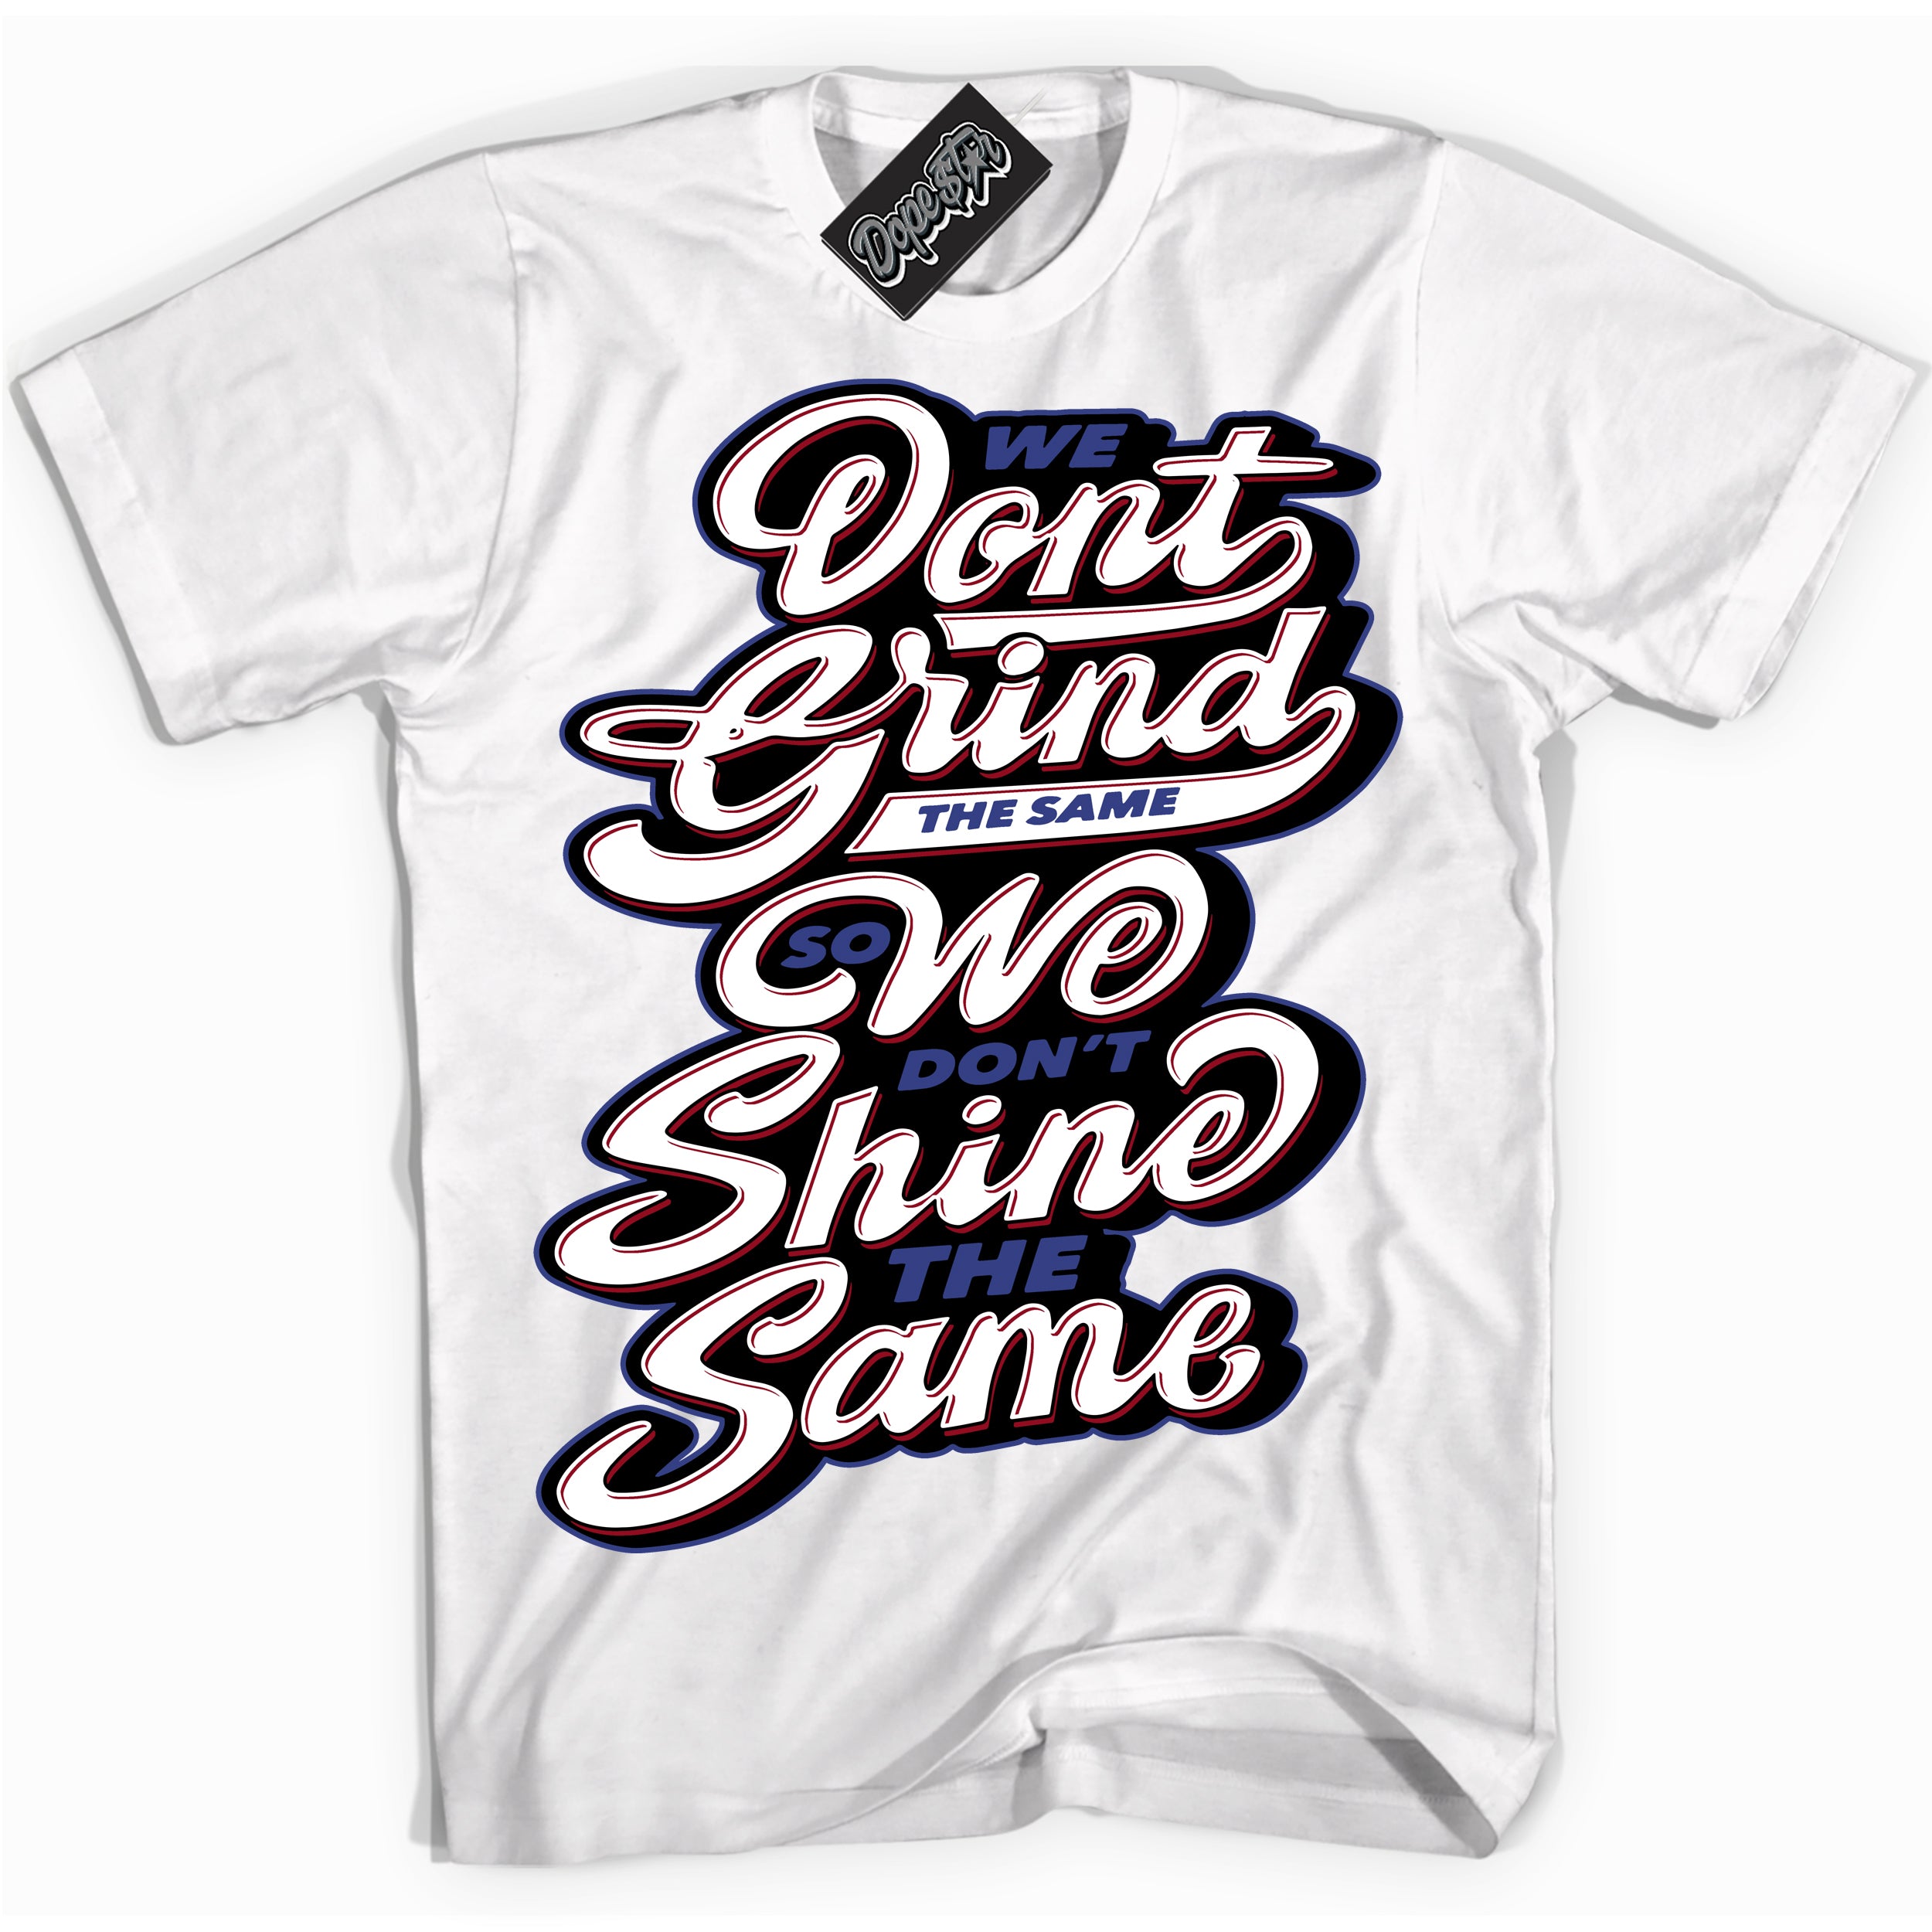 Cool White Shirt with “ Grind Shine ” design that perfectly matches Playoffs 8s Sneakers.